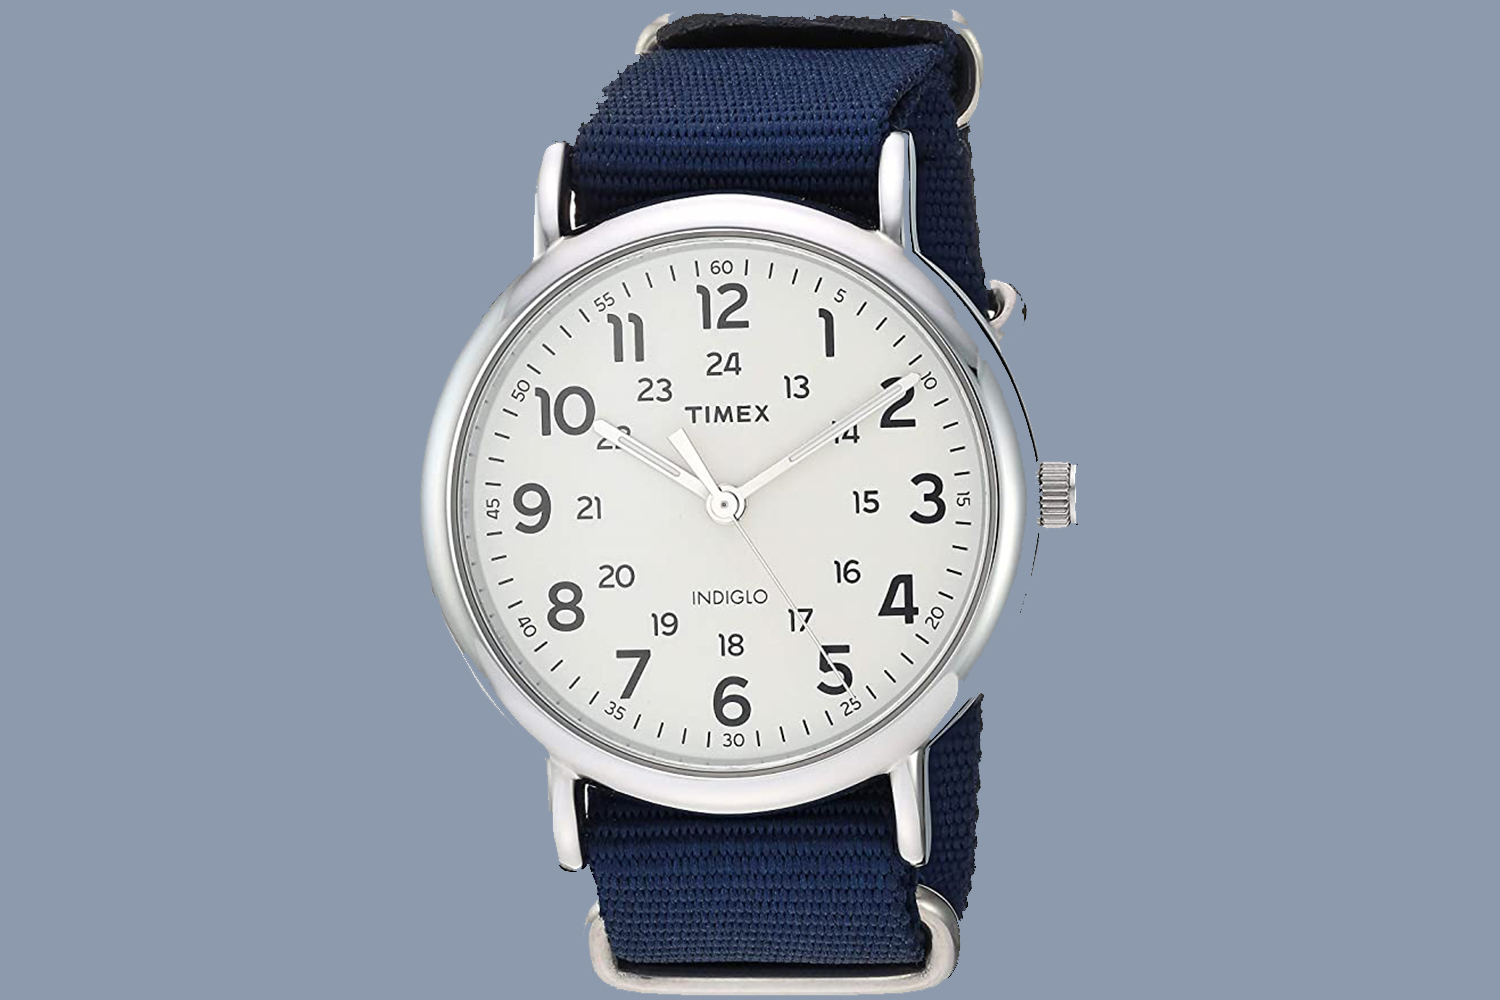 Early Prime Day Deal: The Classic Timex Weekender Watch Has Gone On Sale -  The Manual